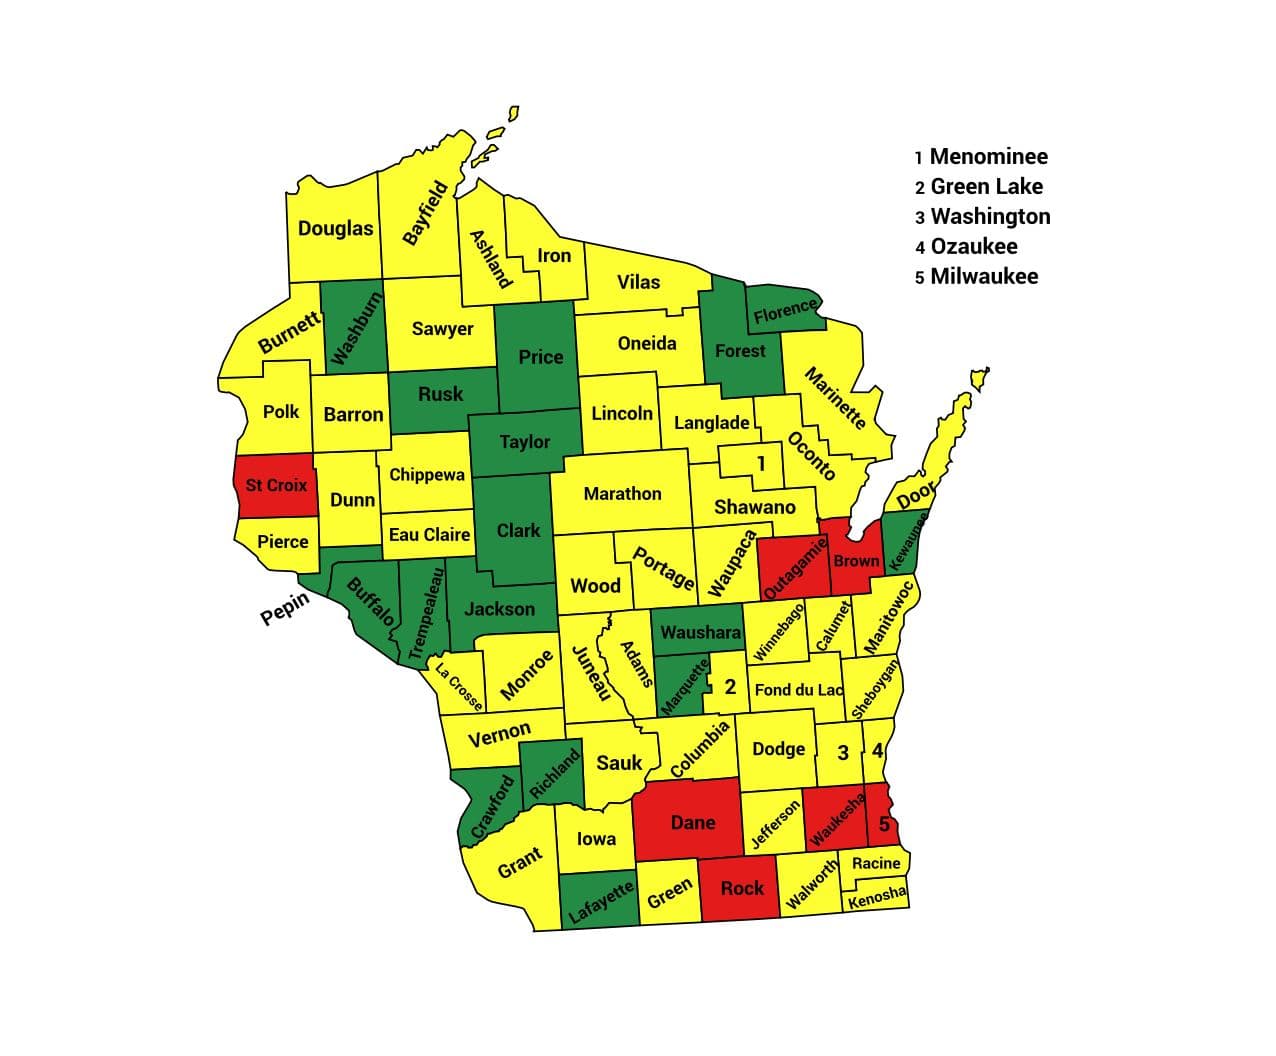 Seth Keshel County Trend Map for Wisconsin